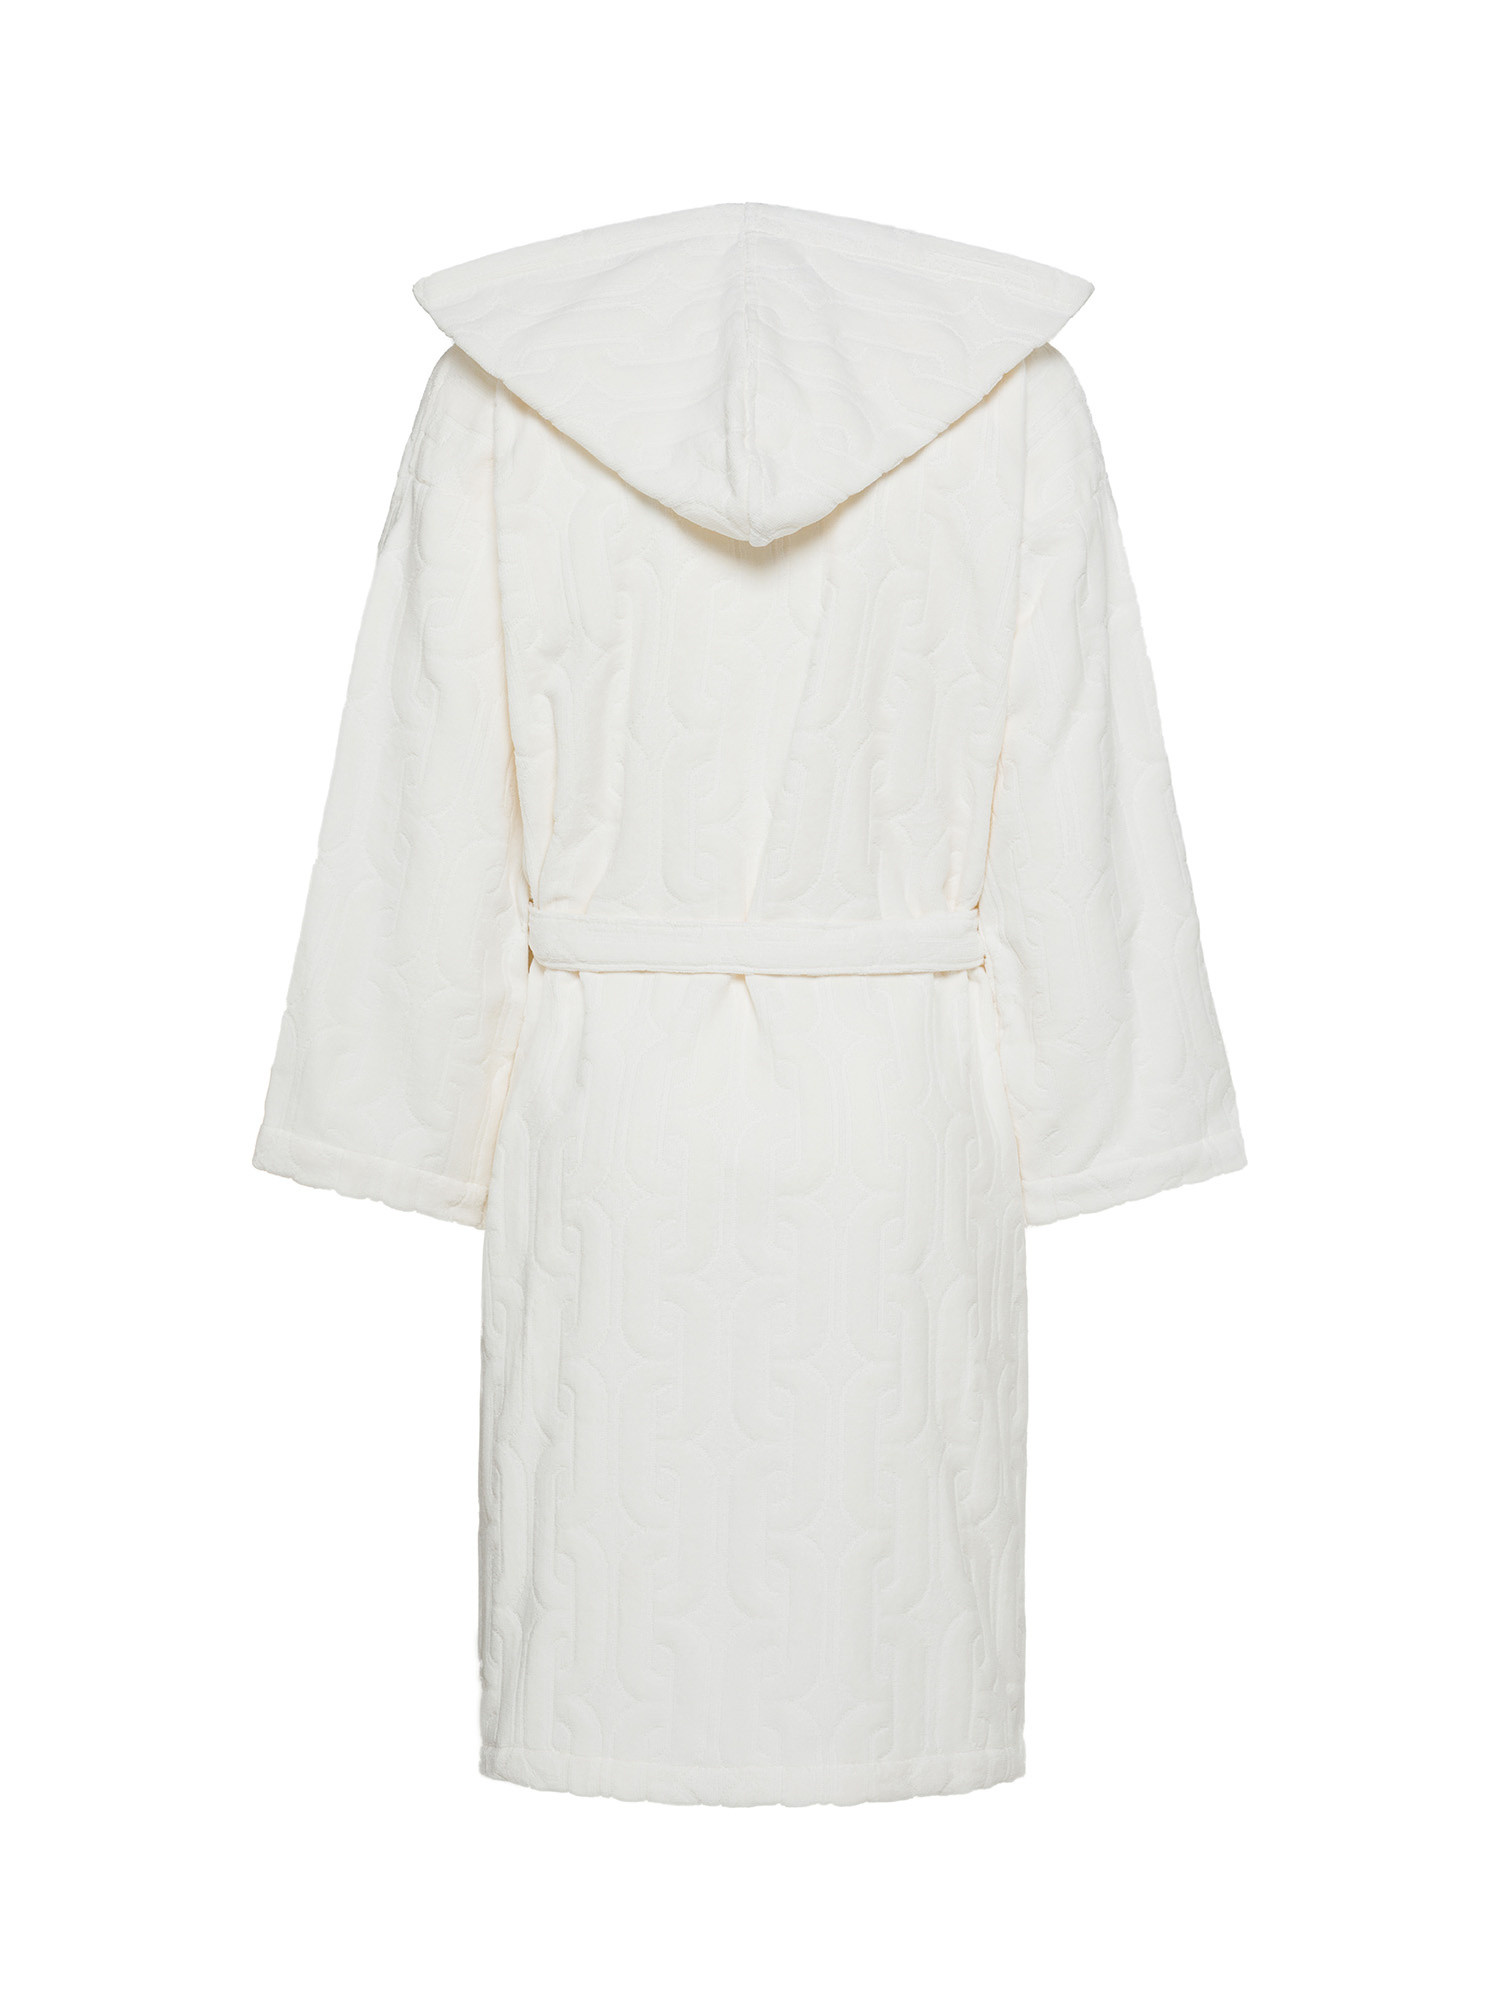 Cotton velour bathrobe with geometric relief pattern, White, large image number 1